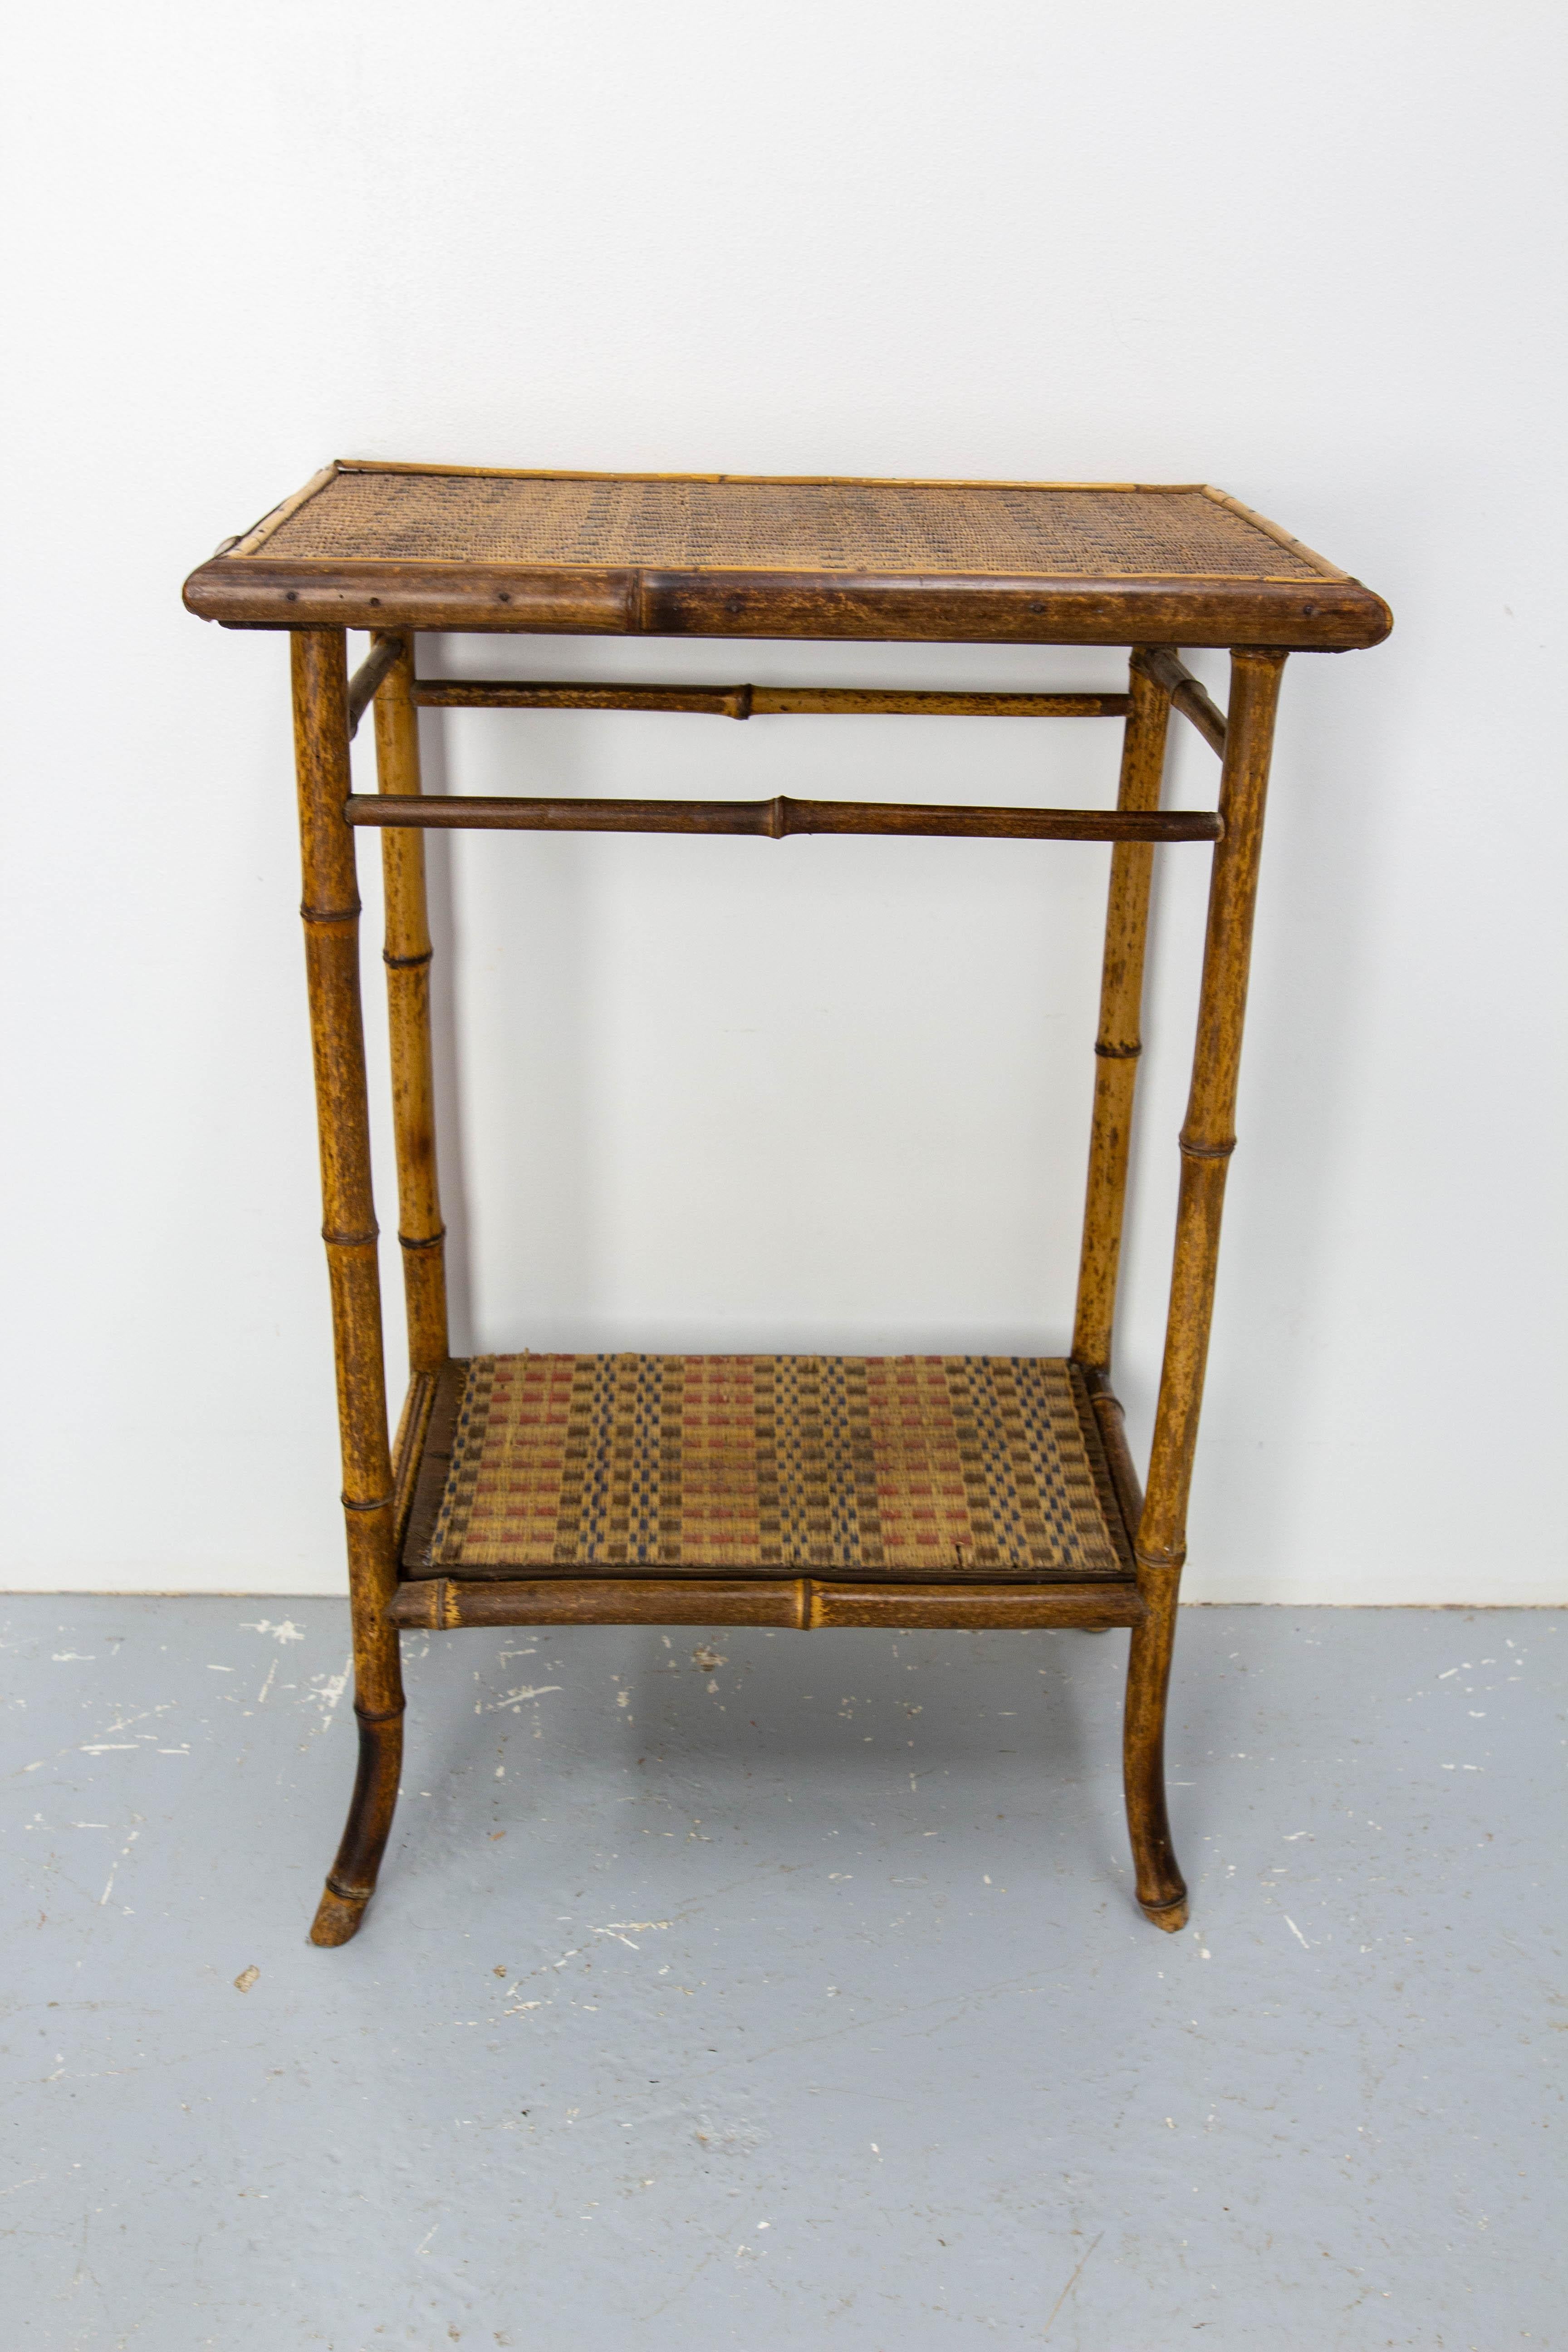 Little high side table. The structure of the furniture is made of bamboo. The surfaces are made of wood covered with woven straw
Made circa 1920

Good condition, delivered disassembled, stable assembly, once screwed.

Shipping:
60 / 39 / 72 cm 6 kg.